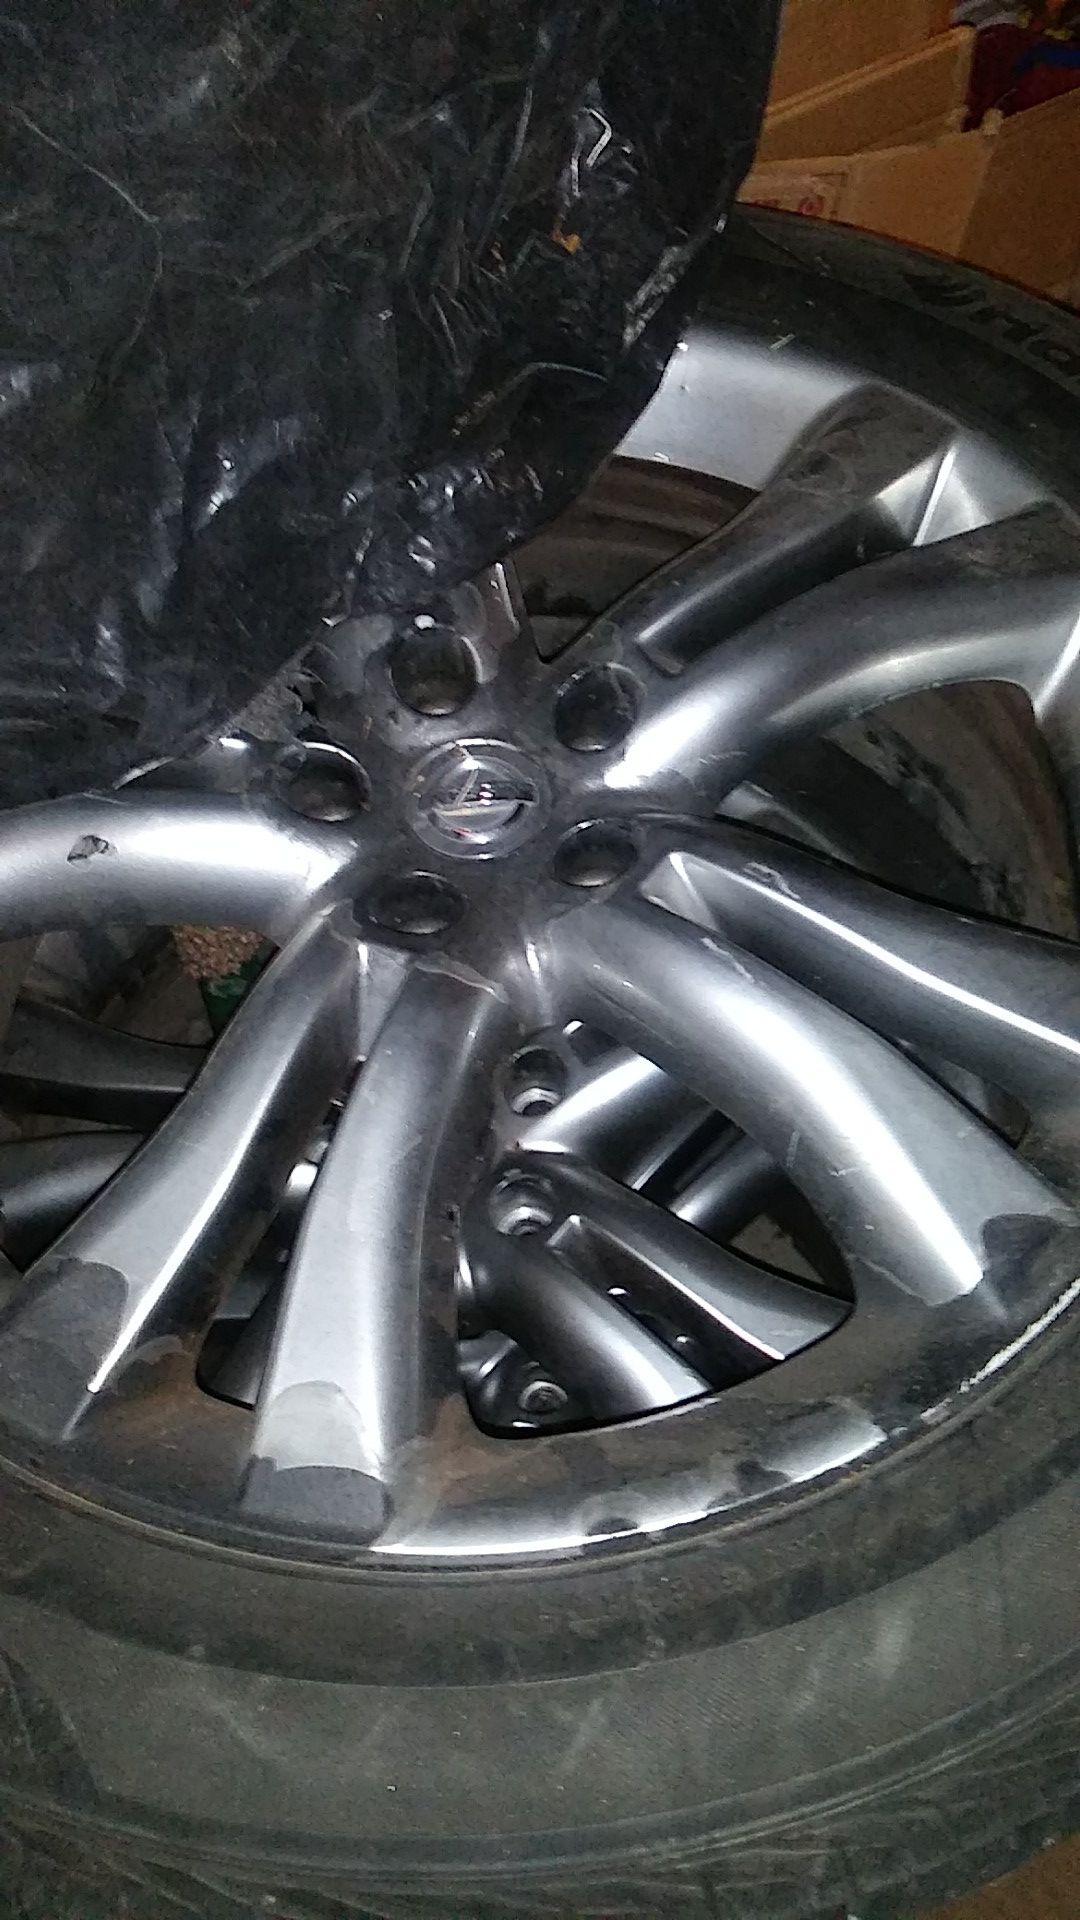 Nissan factory 20inch rims and tires in decent shape